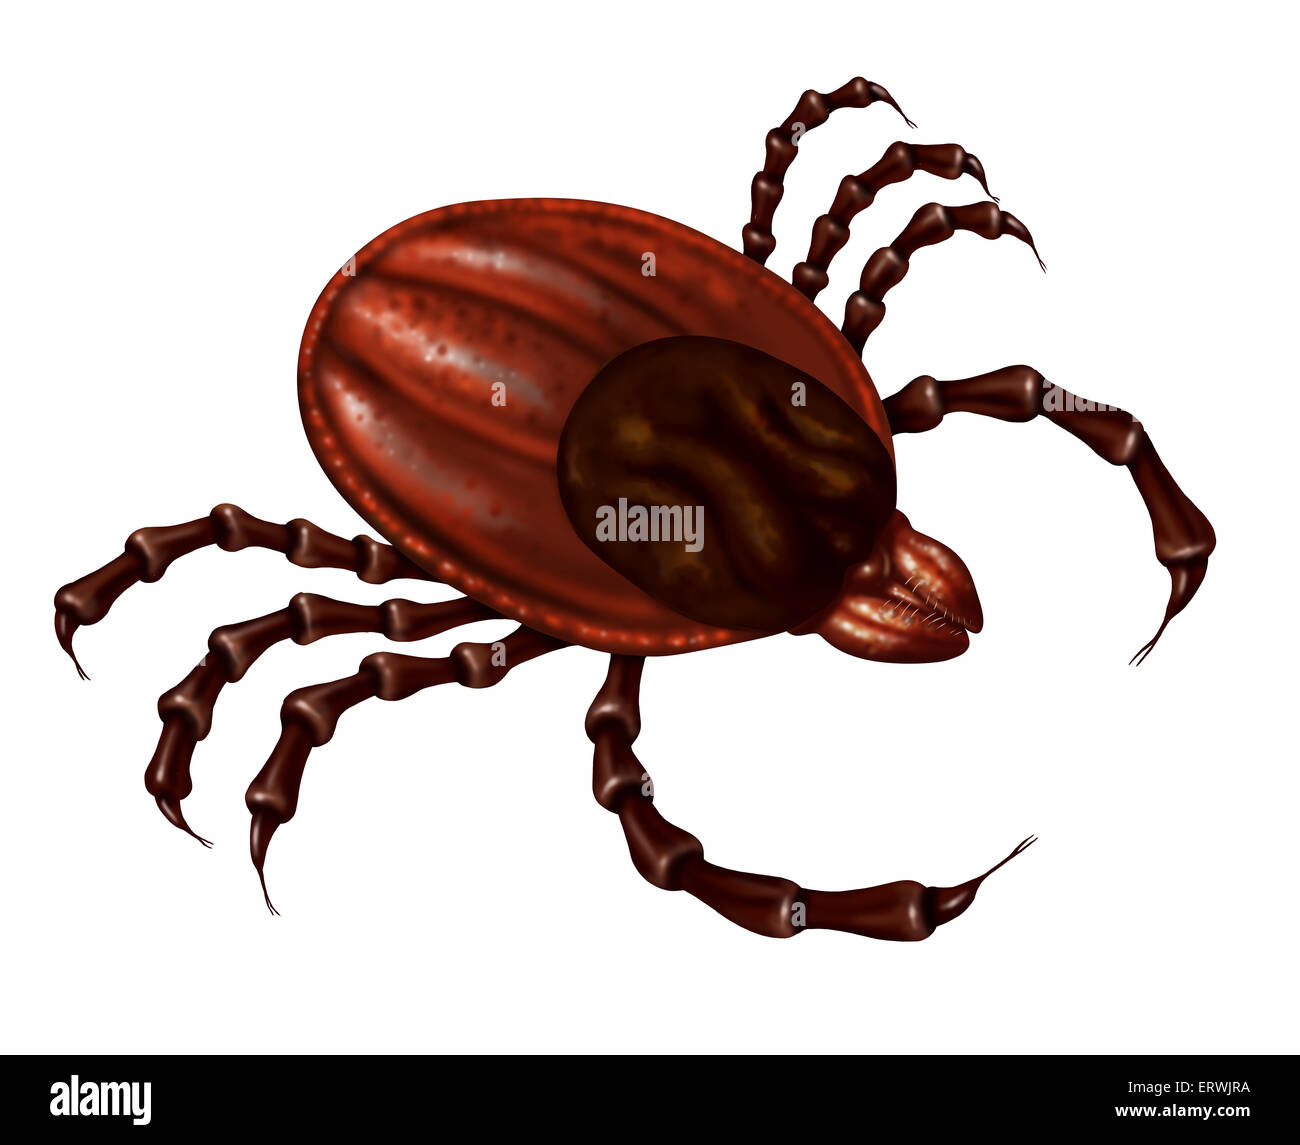 Tick insect close up illustration isolated on a white background as a symbol of a parasite arachnid that sucks blood and infects animals with bacteria and viruses with possible illness as lyme disease and fever. Stock Photo